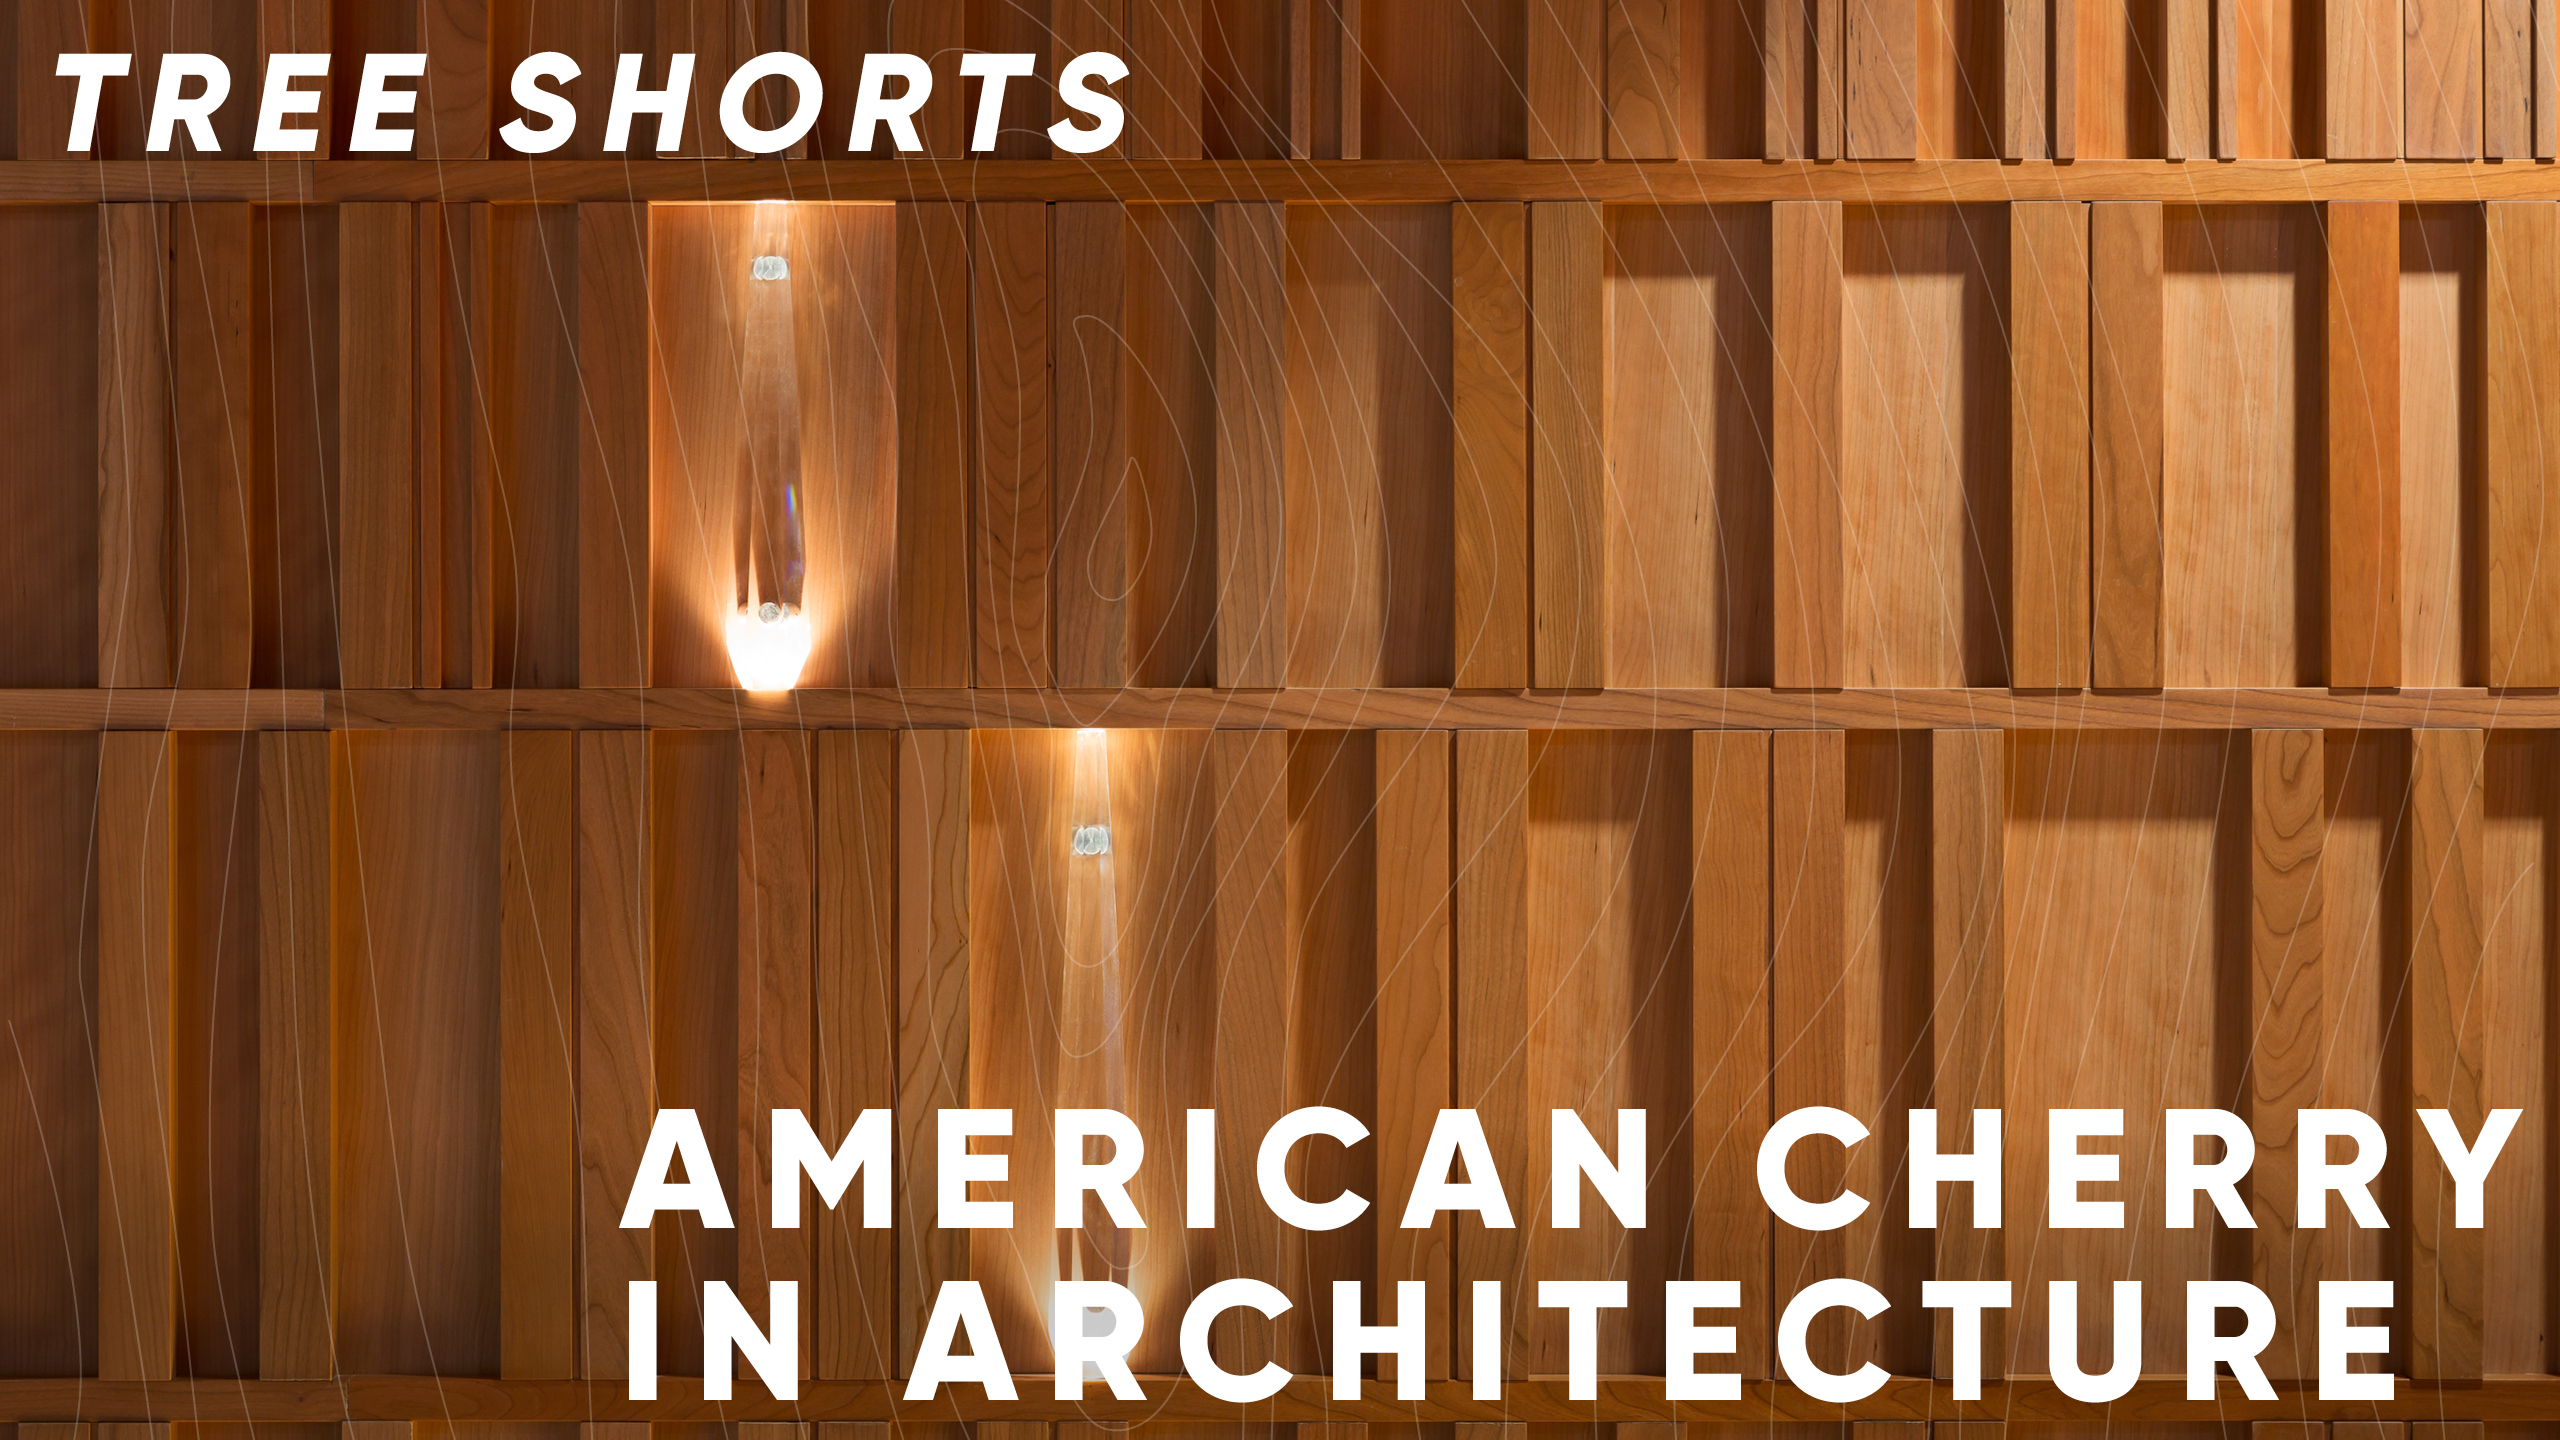 Tree shorts: American cherry in architecture 